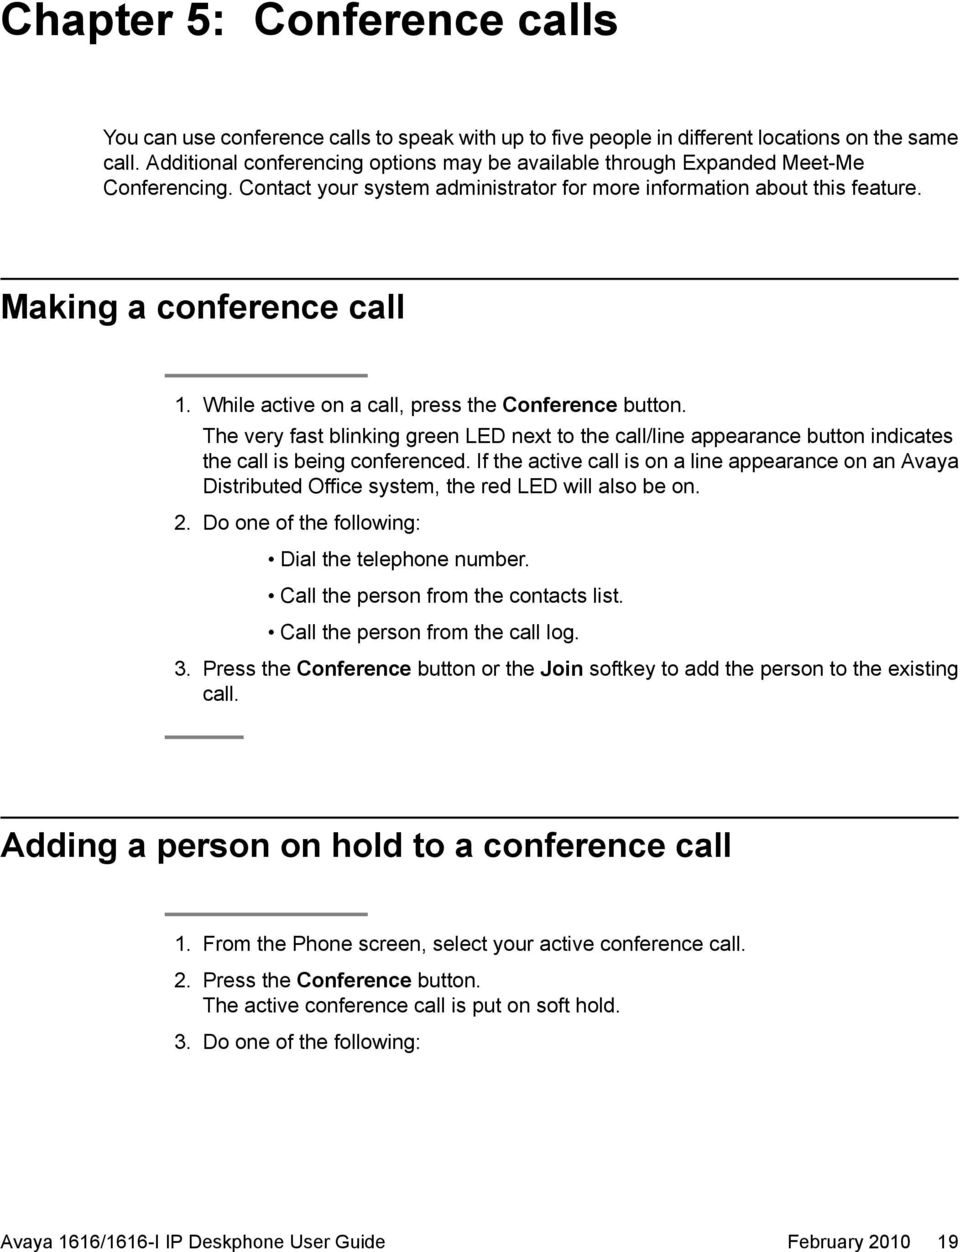 While active on a call, press the Conference button. The very fast blinking green LED next to the call/line appearance button indicates the call is being conferenced.